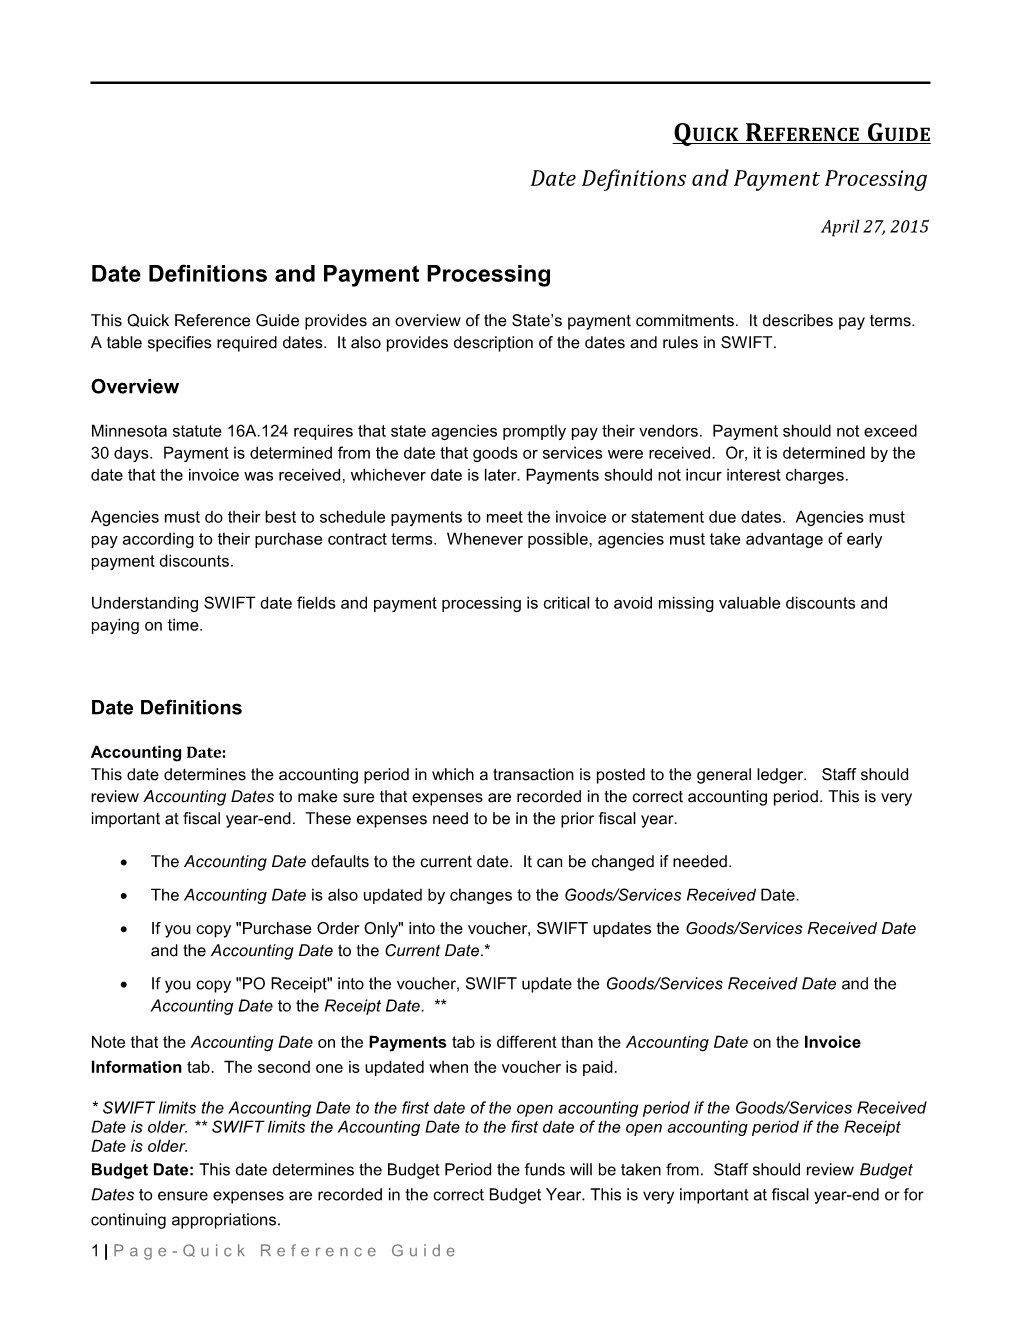 Date Definitions and Payment Processing